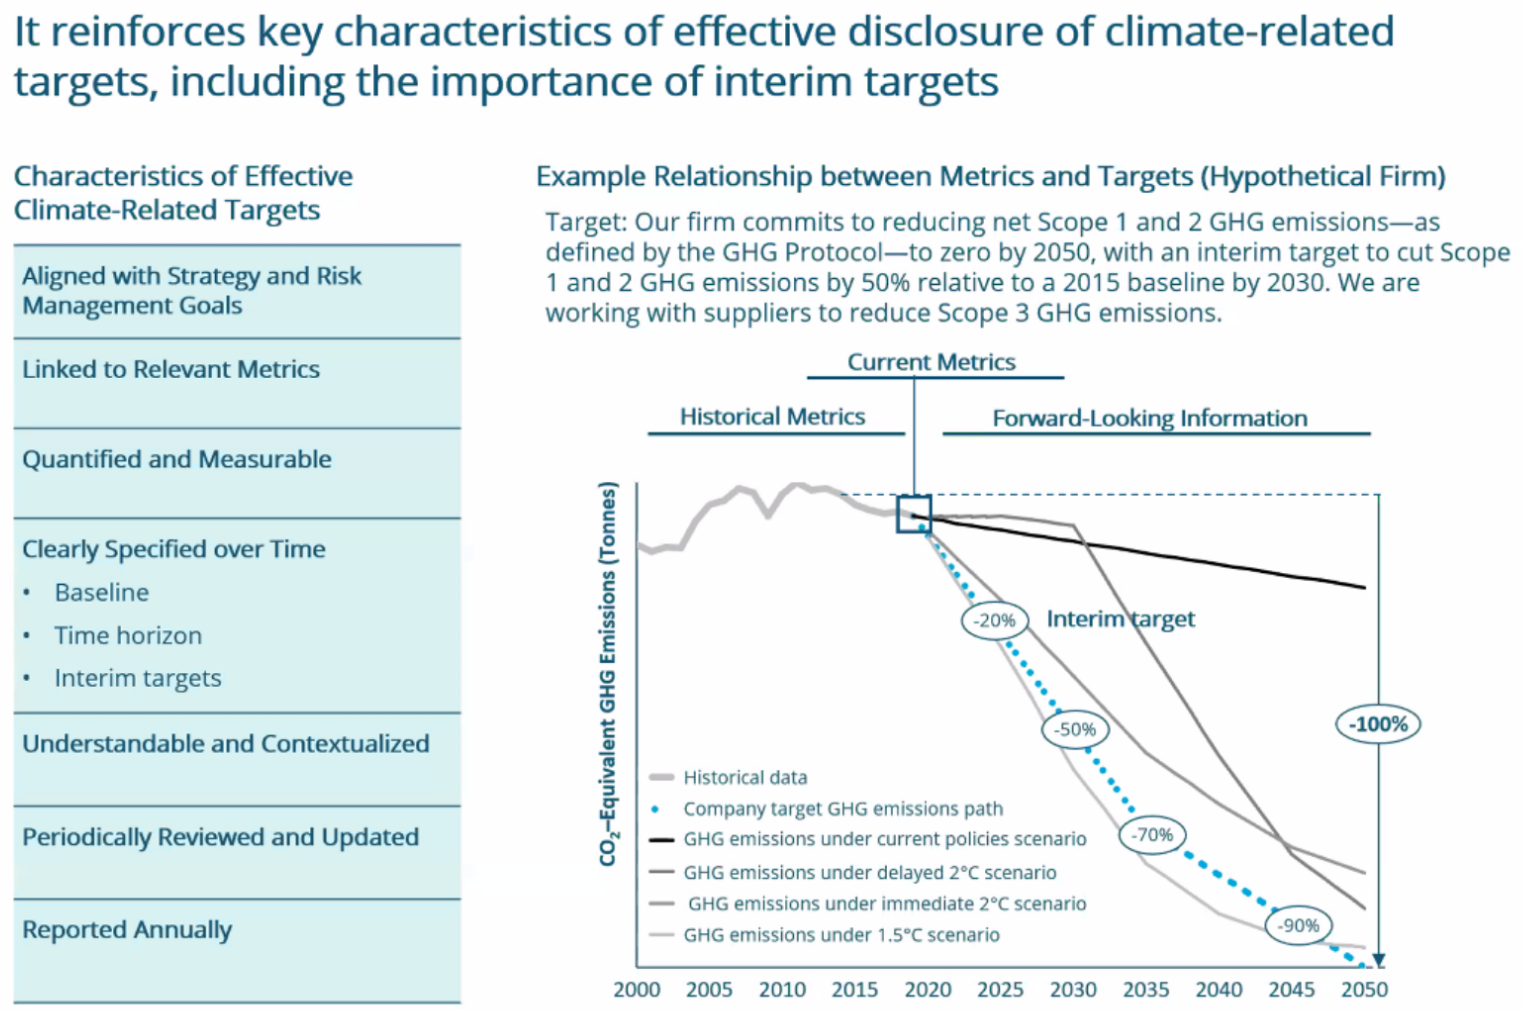 characteristics of effective climate-related targets